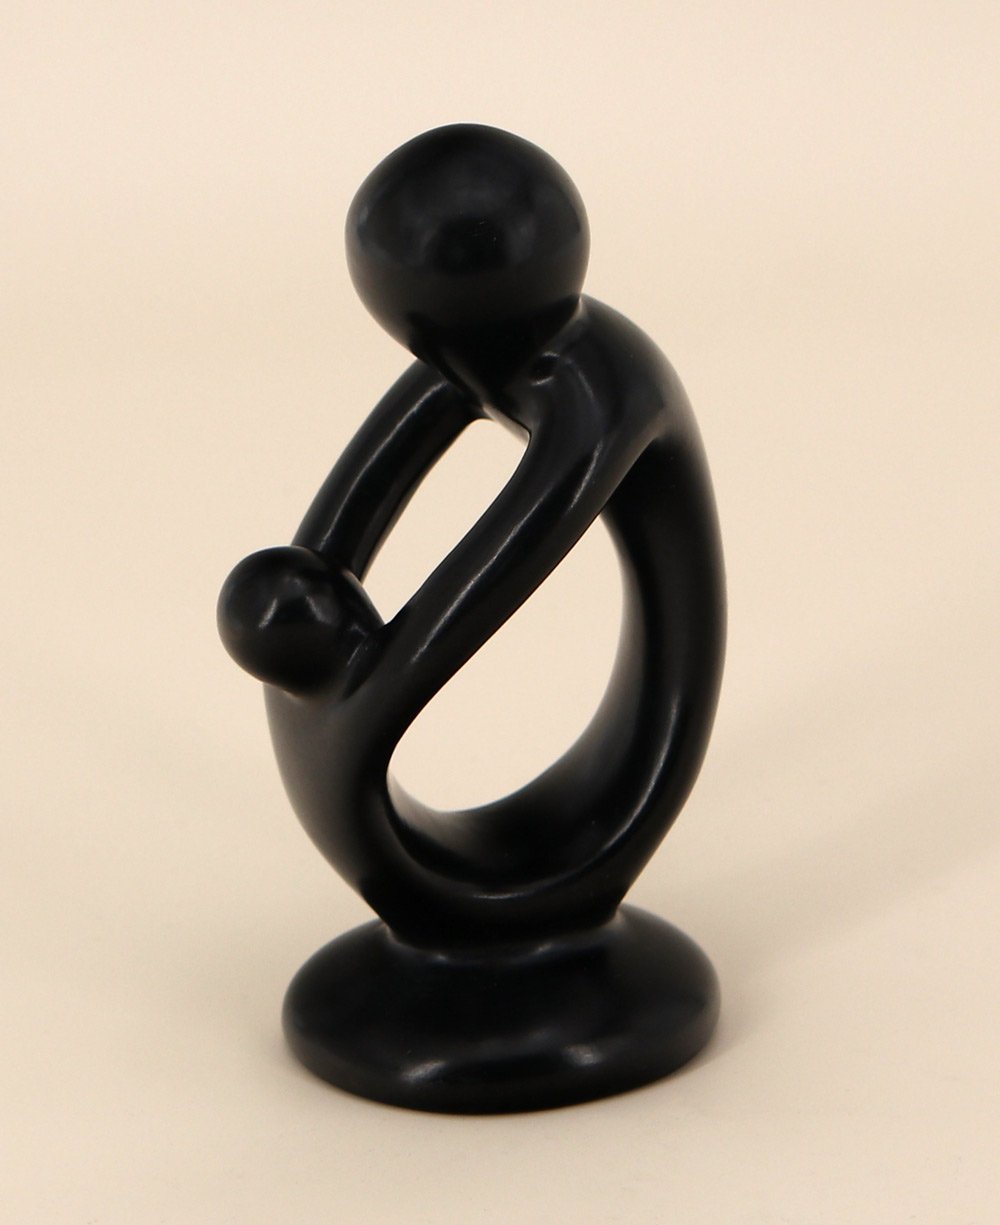 Small Abstract Mother and Child Playful Sculpture - Sculptures & Statues